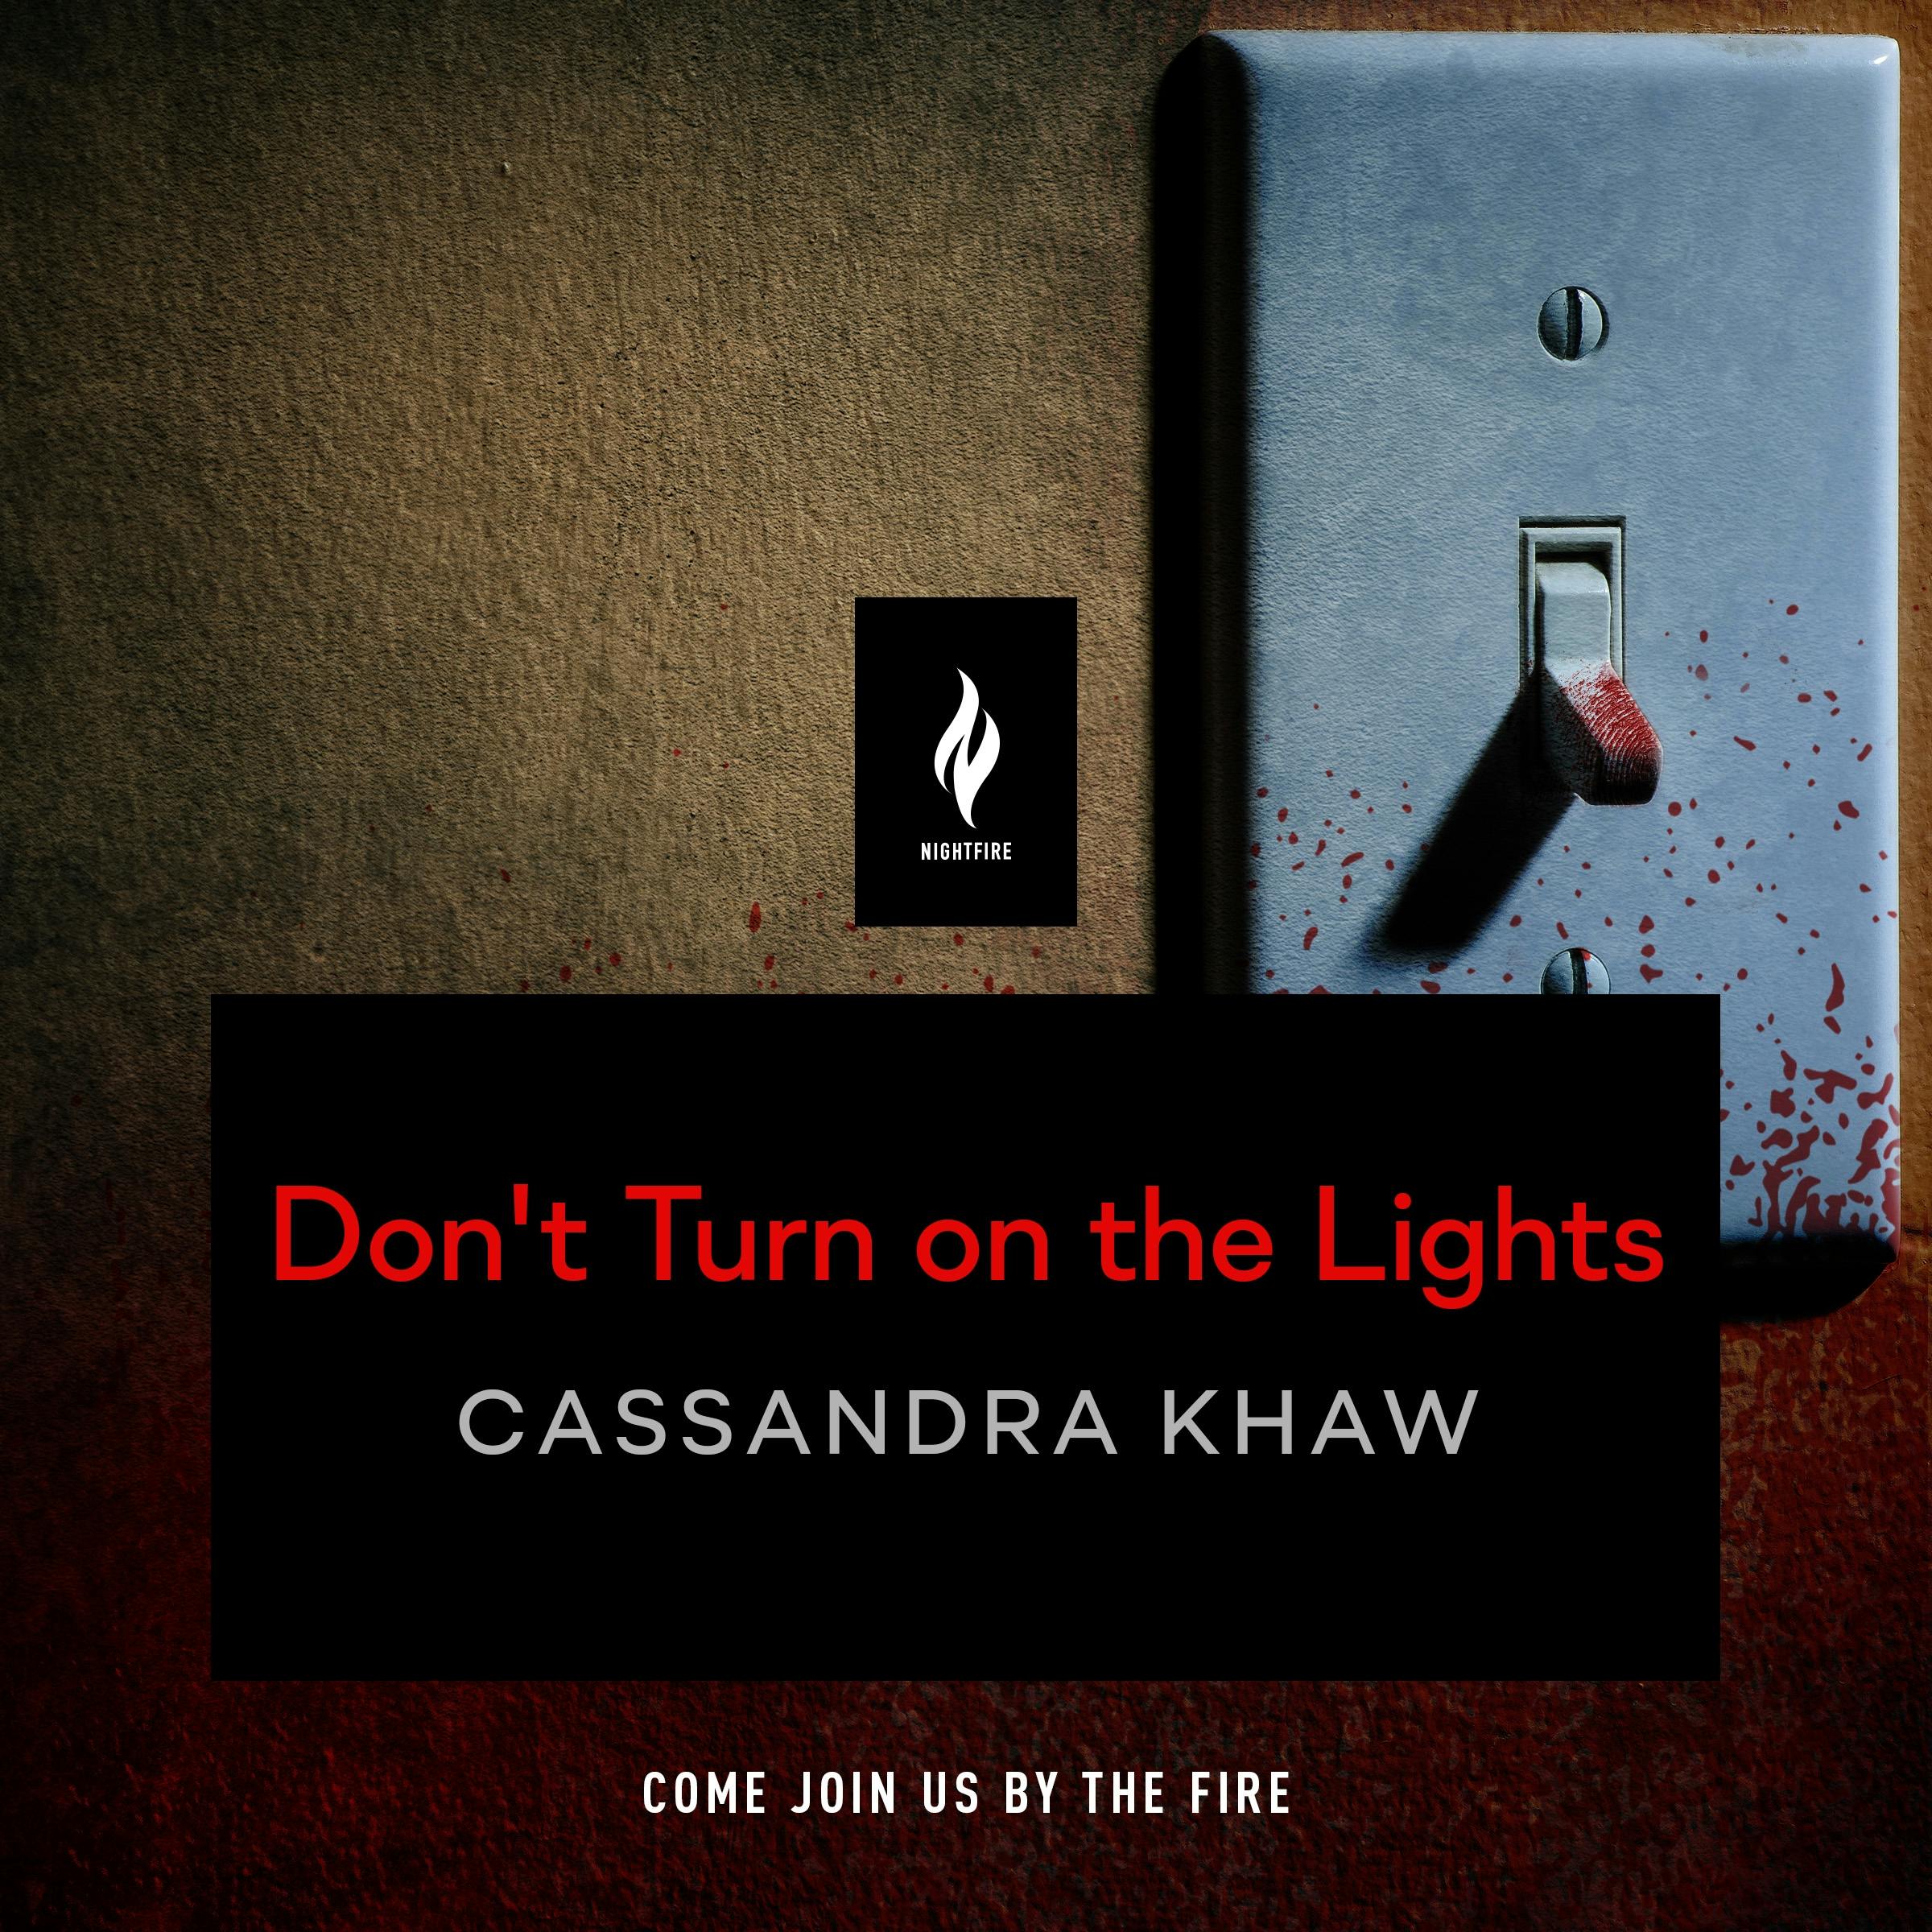 Cover for the book titled as: Don't Turn on the Lights